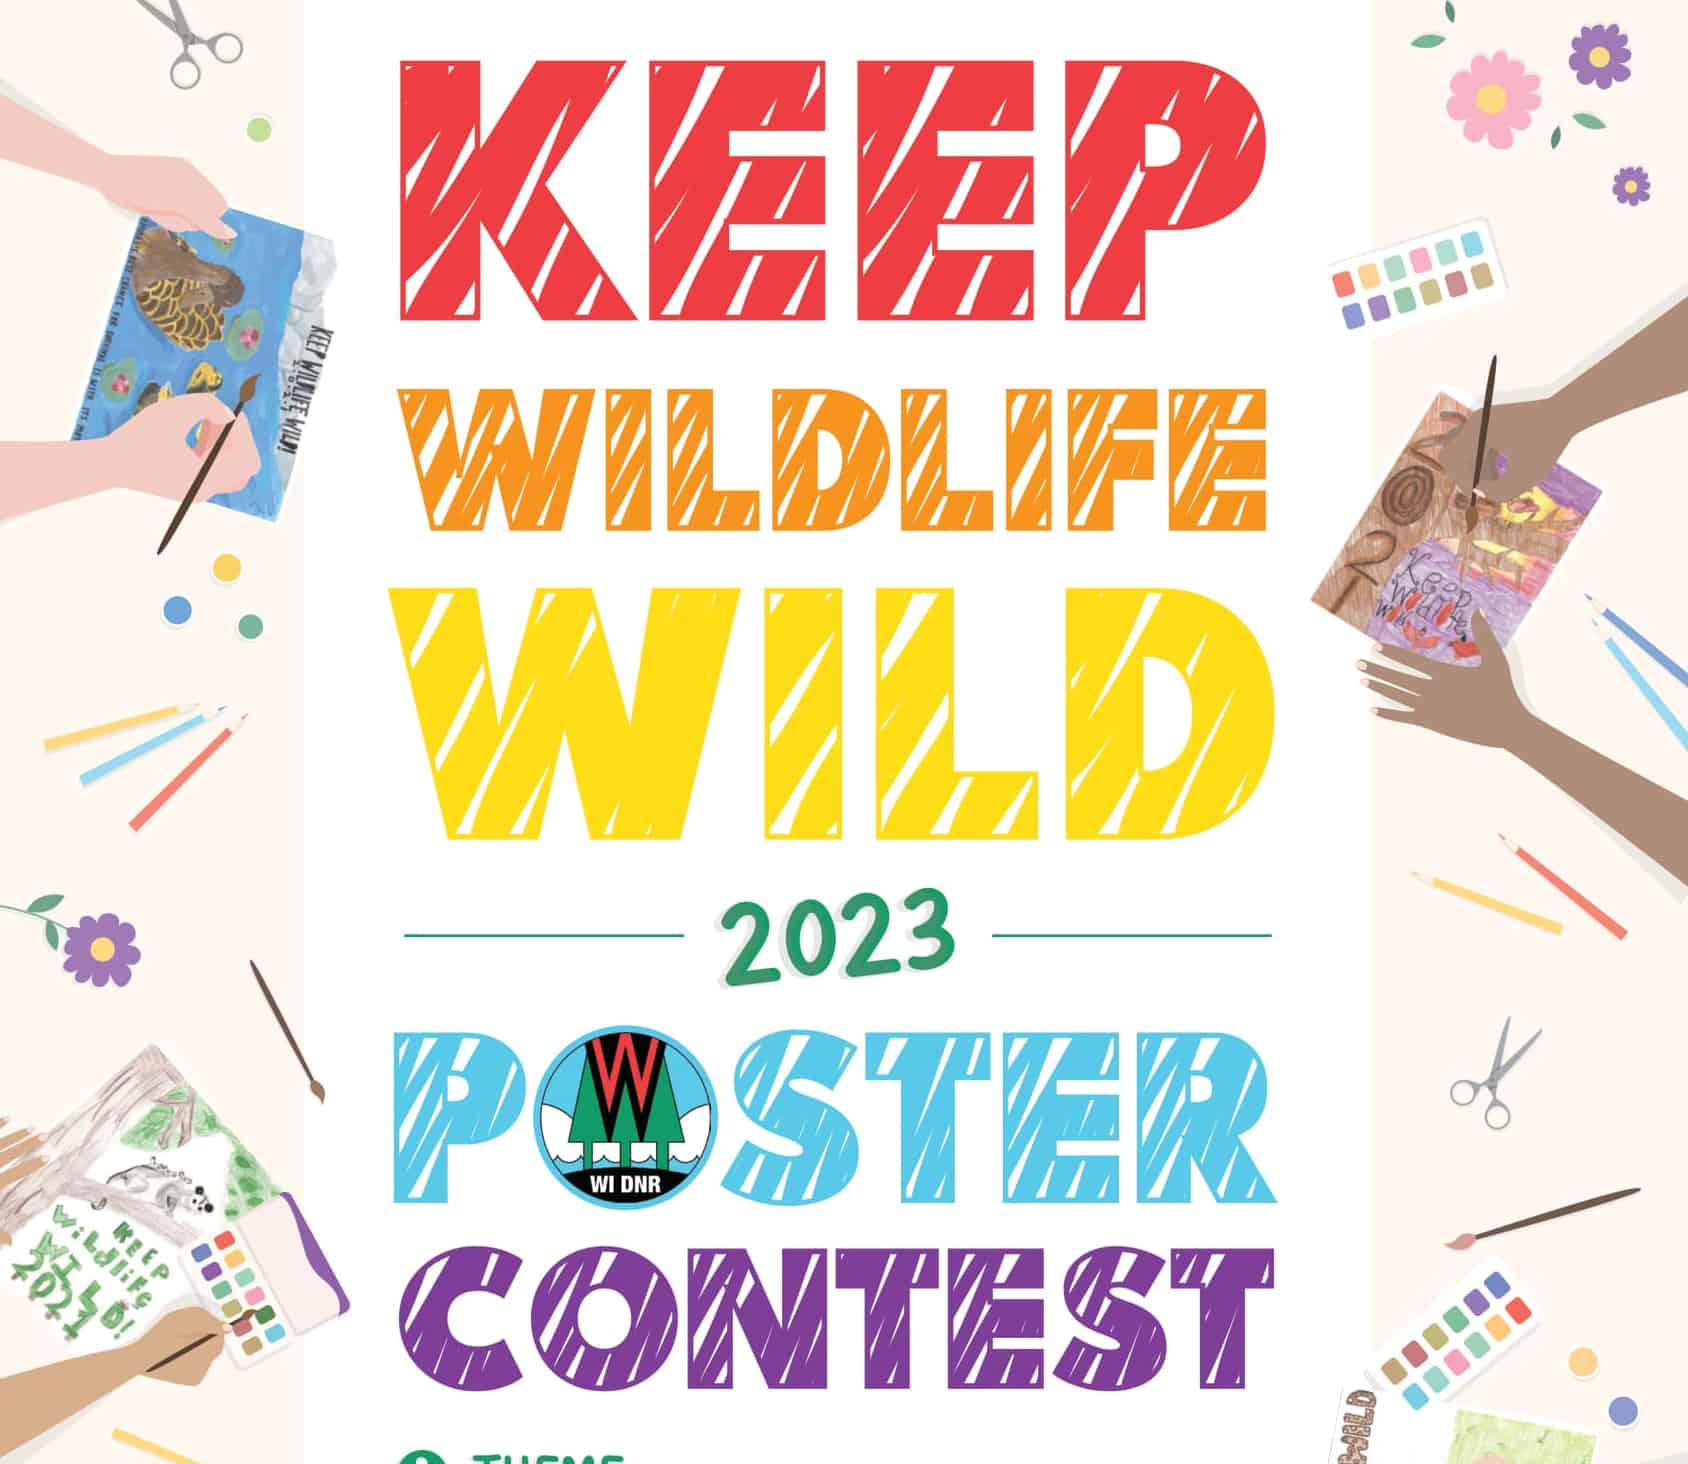 DNR accepting submissions for Keep Wildlife Wild poster contest